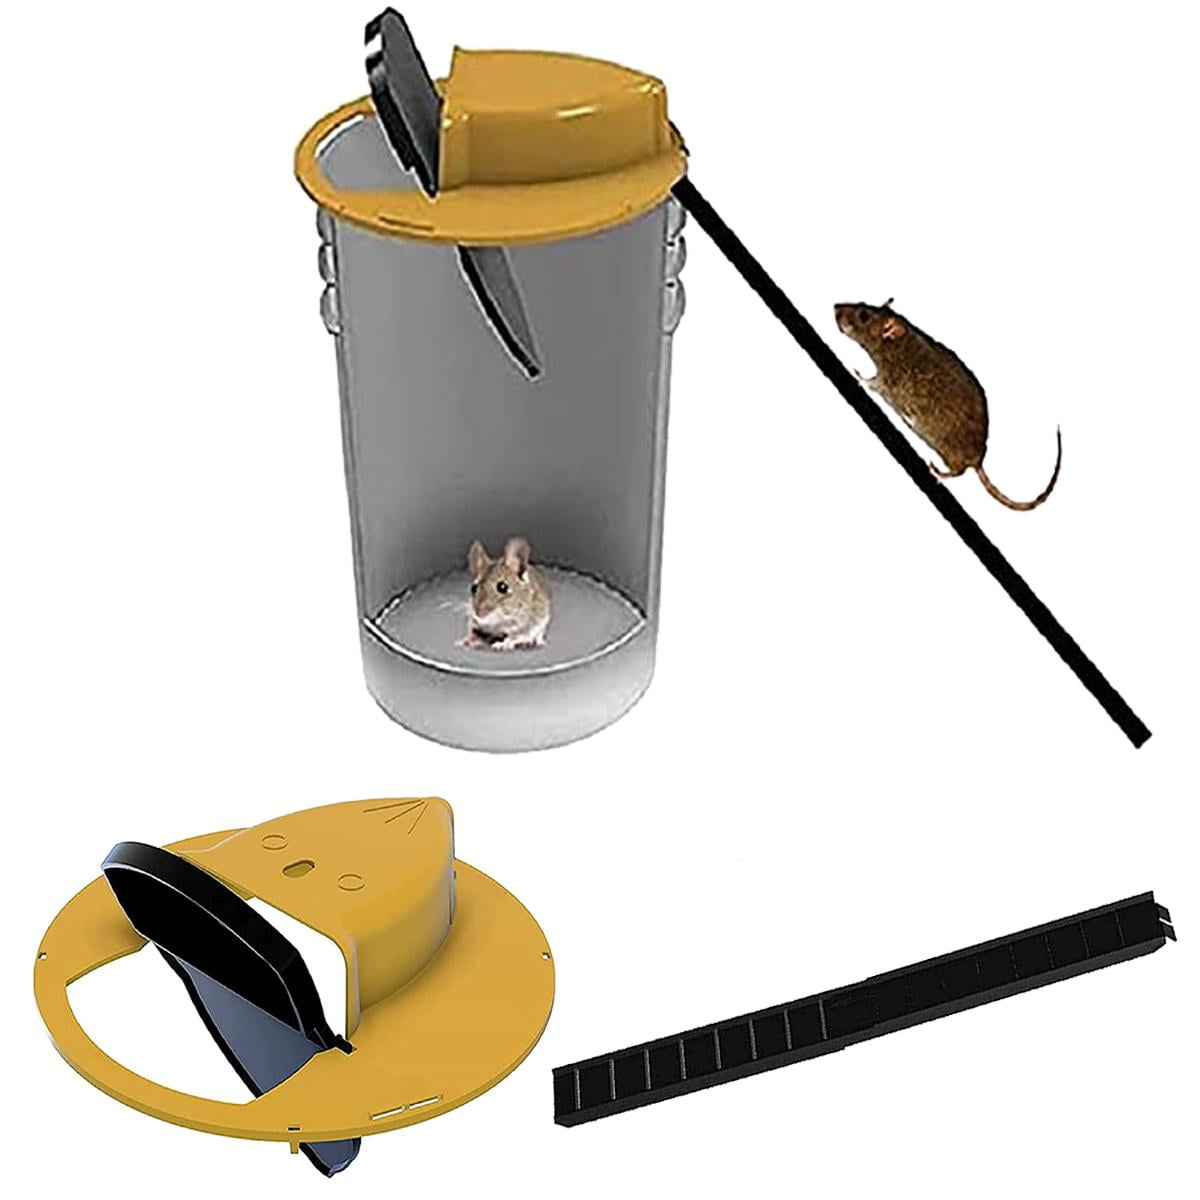 Mouse Trap Bucket 5 Gallon Bucket Compatible Rat Trap for Indoor & Outdoor Flip and Slide Mouse Trap for Multi Catch 